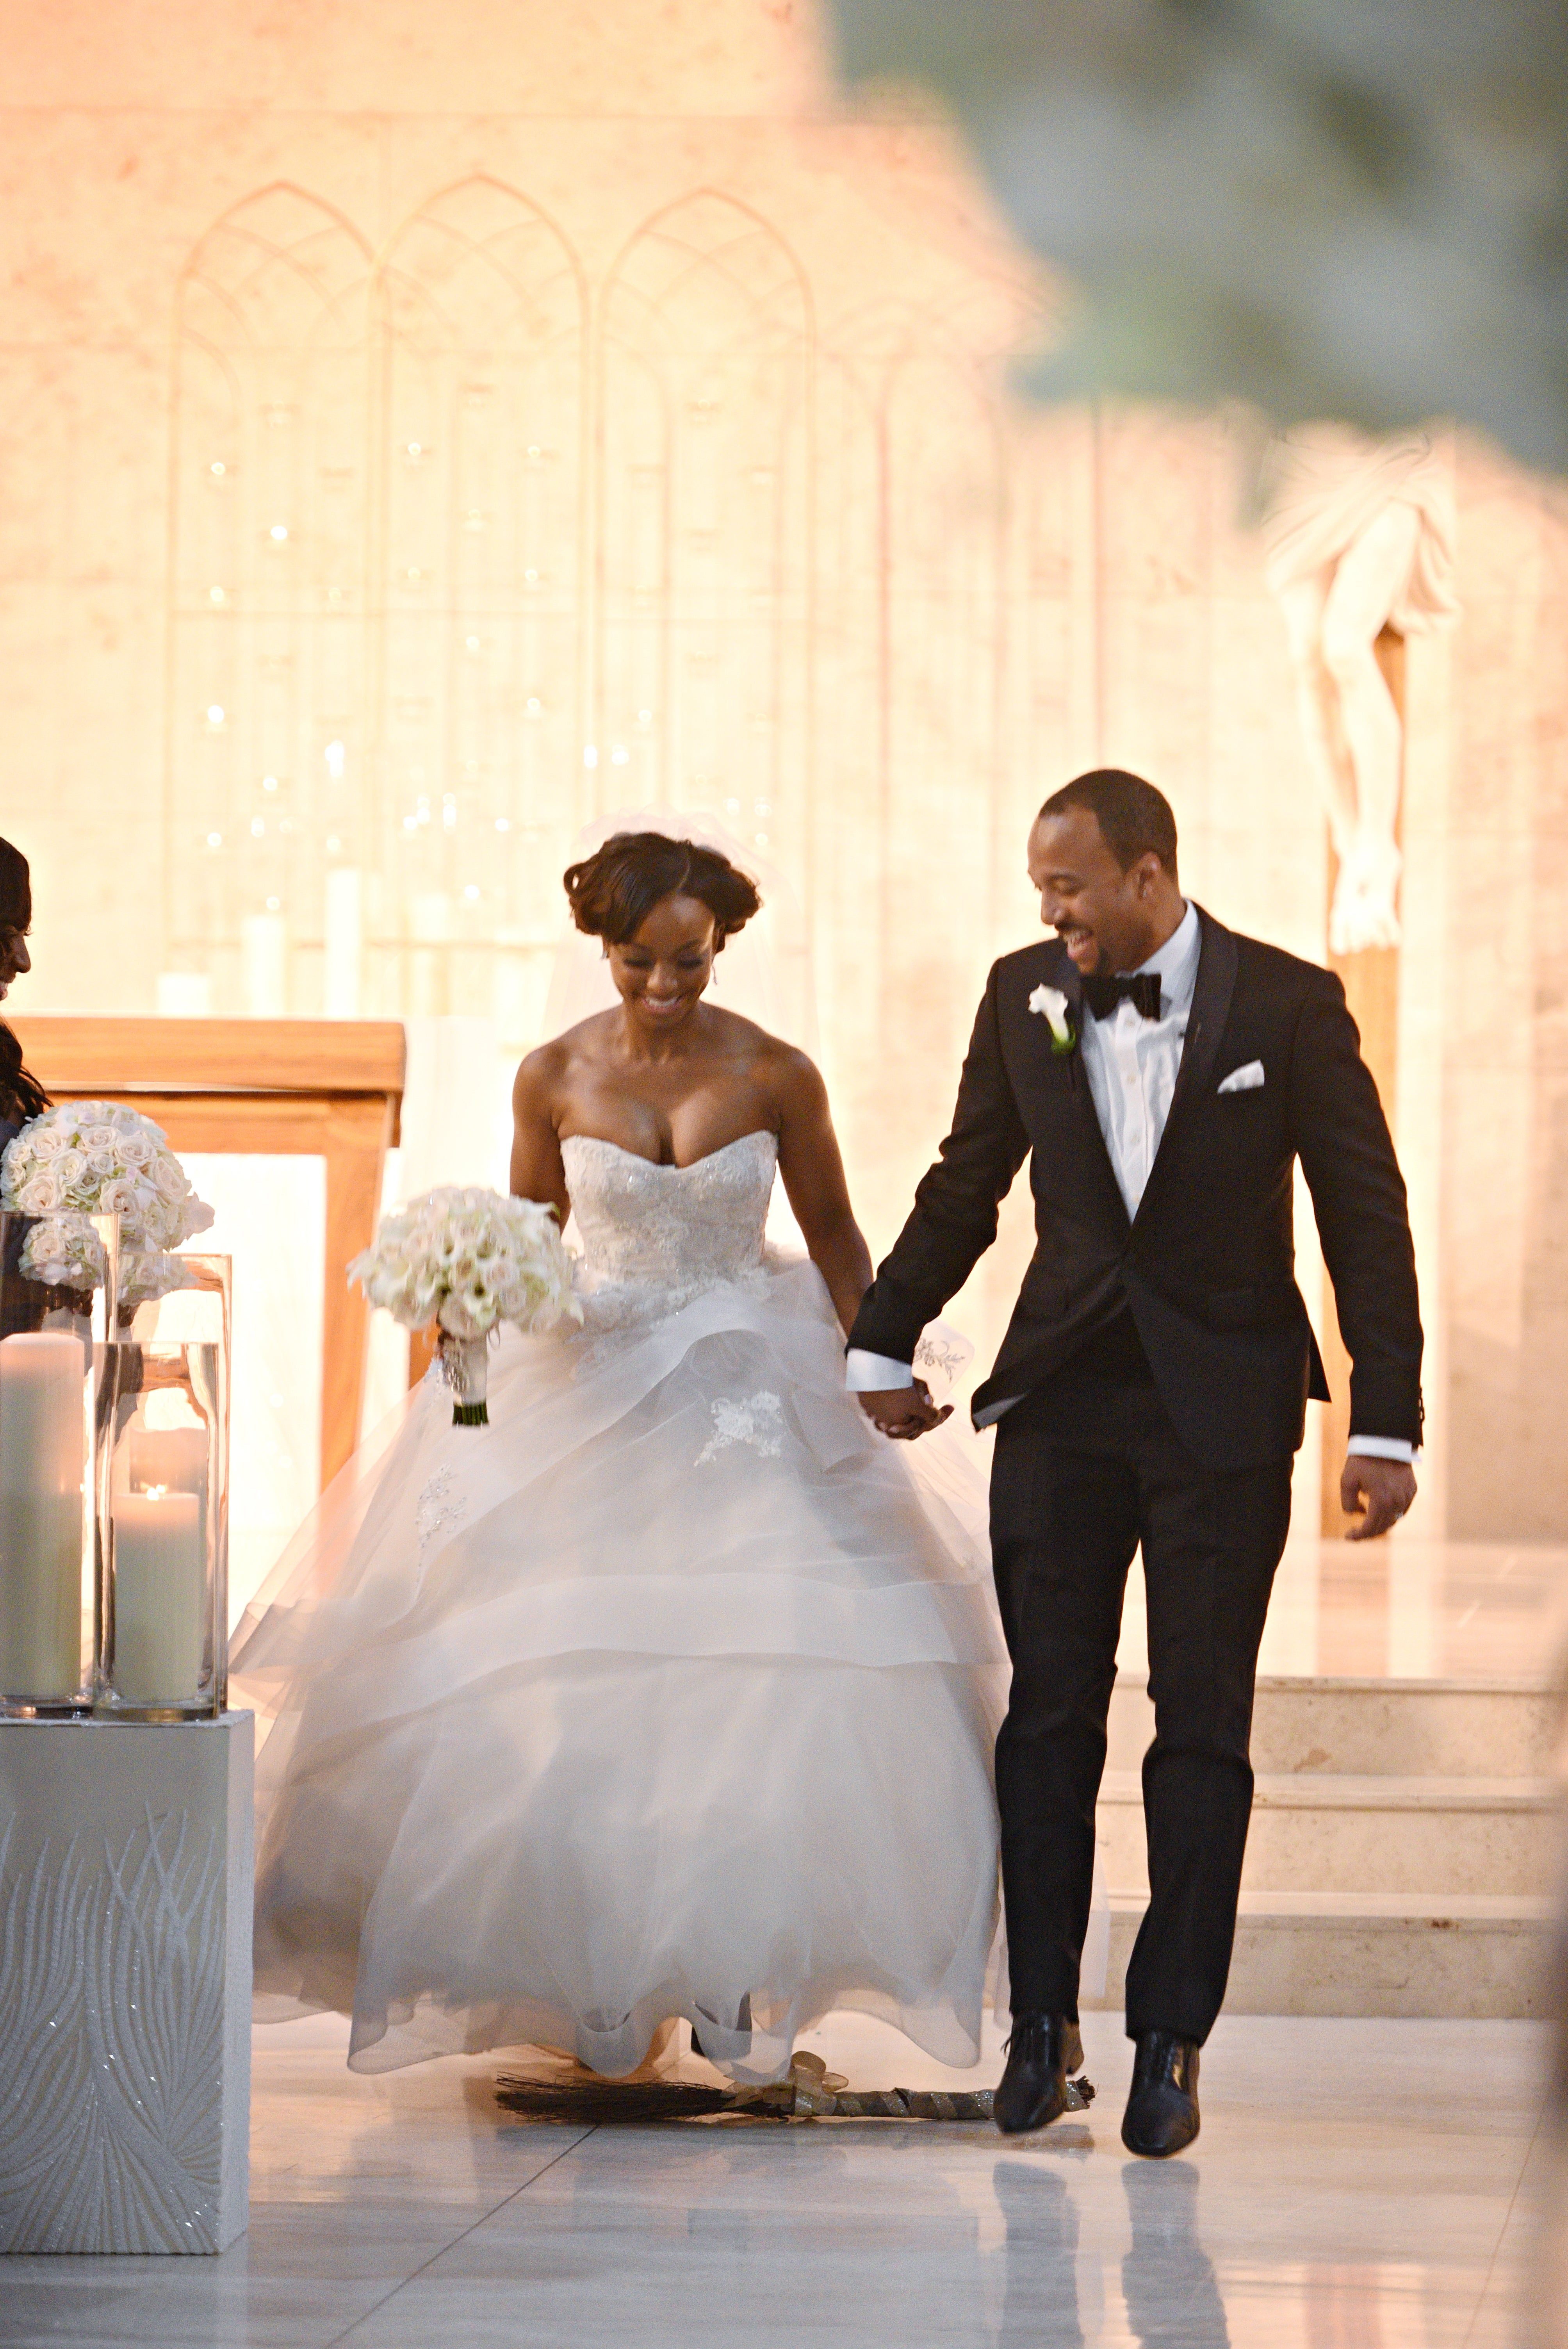 Bridal Bliss: Nina and Kenneth's Romantic New Orleans Wedding Photos Are Just Beautiful
